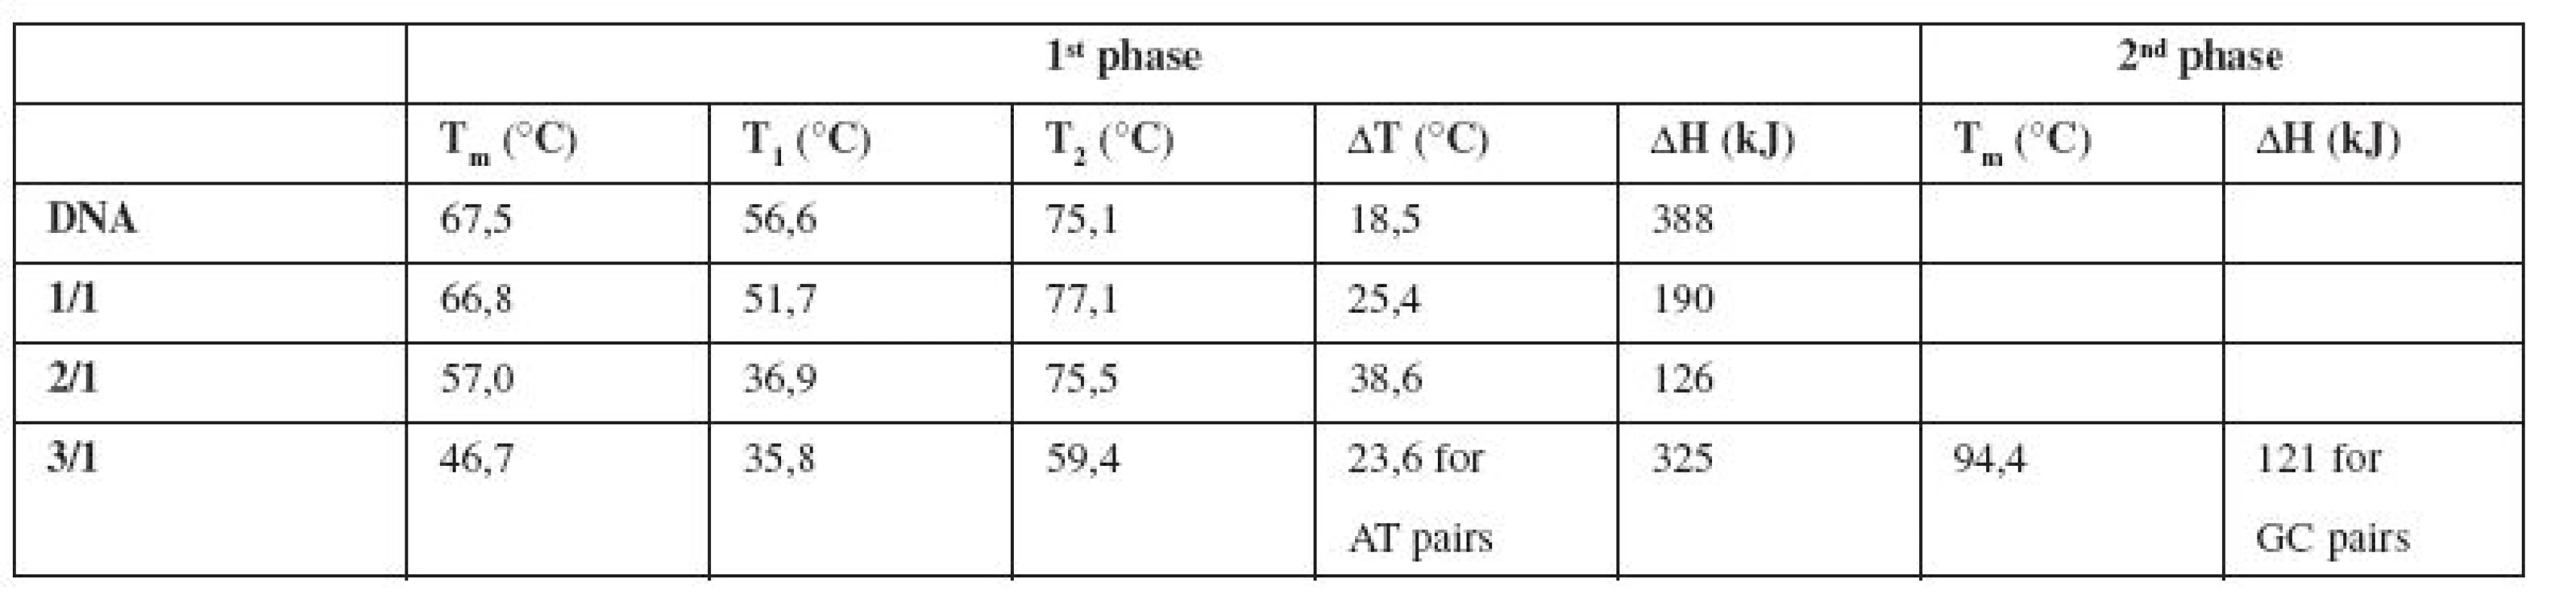 Thermodynamic characteristics determined from the melting curves of pure DNA and the complexes E/DNA in concentration ratios 1/1, 2/1, 3/1